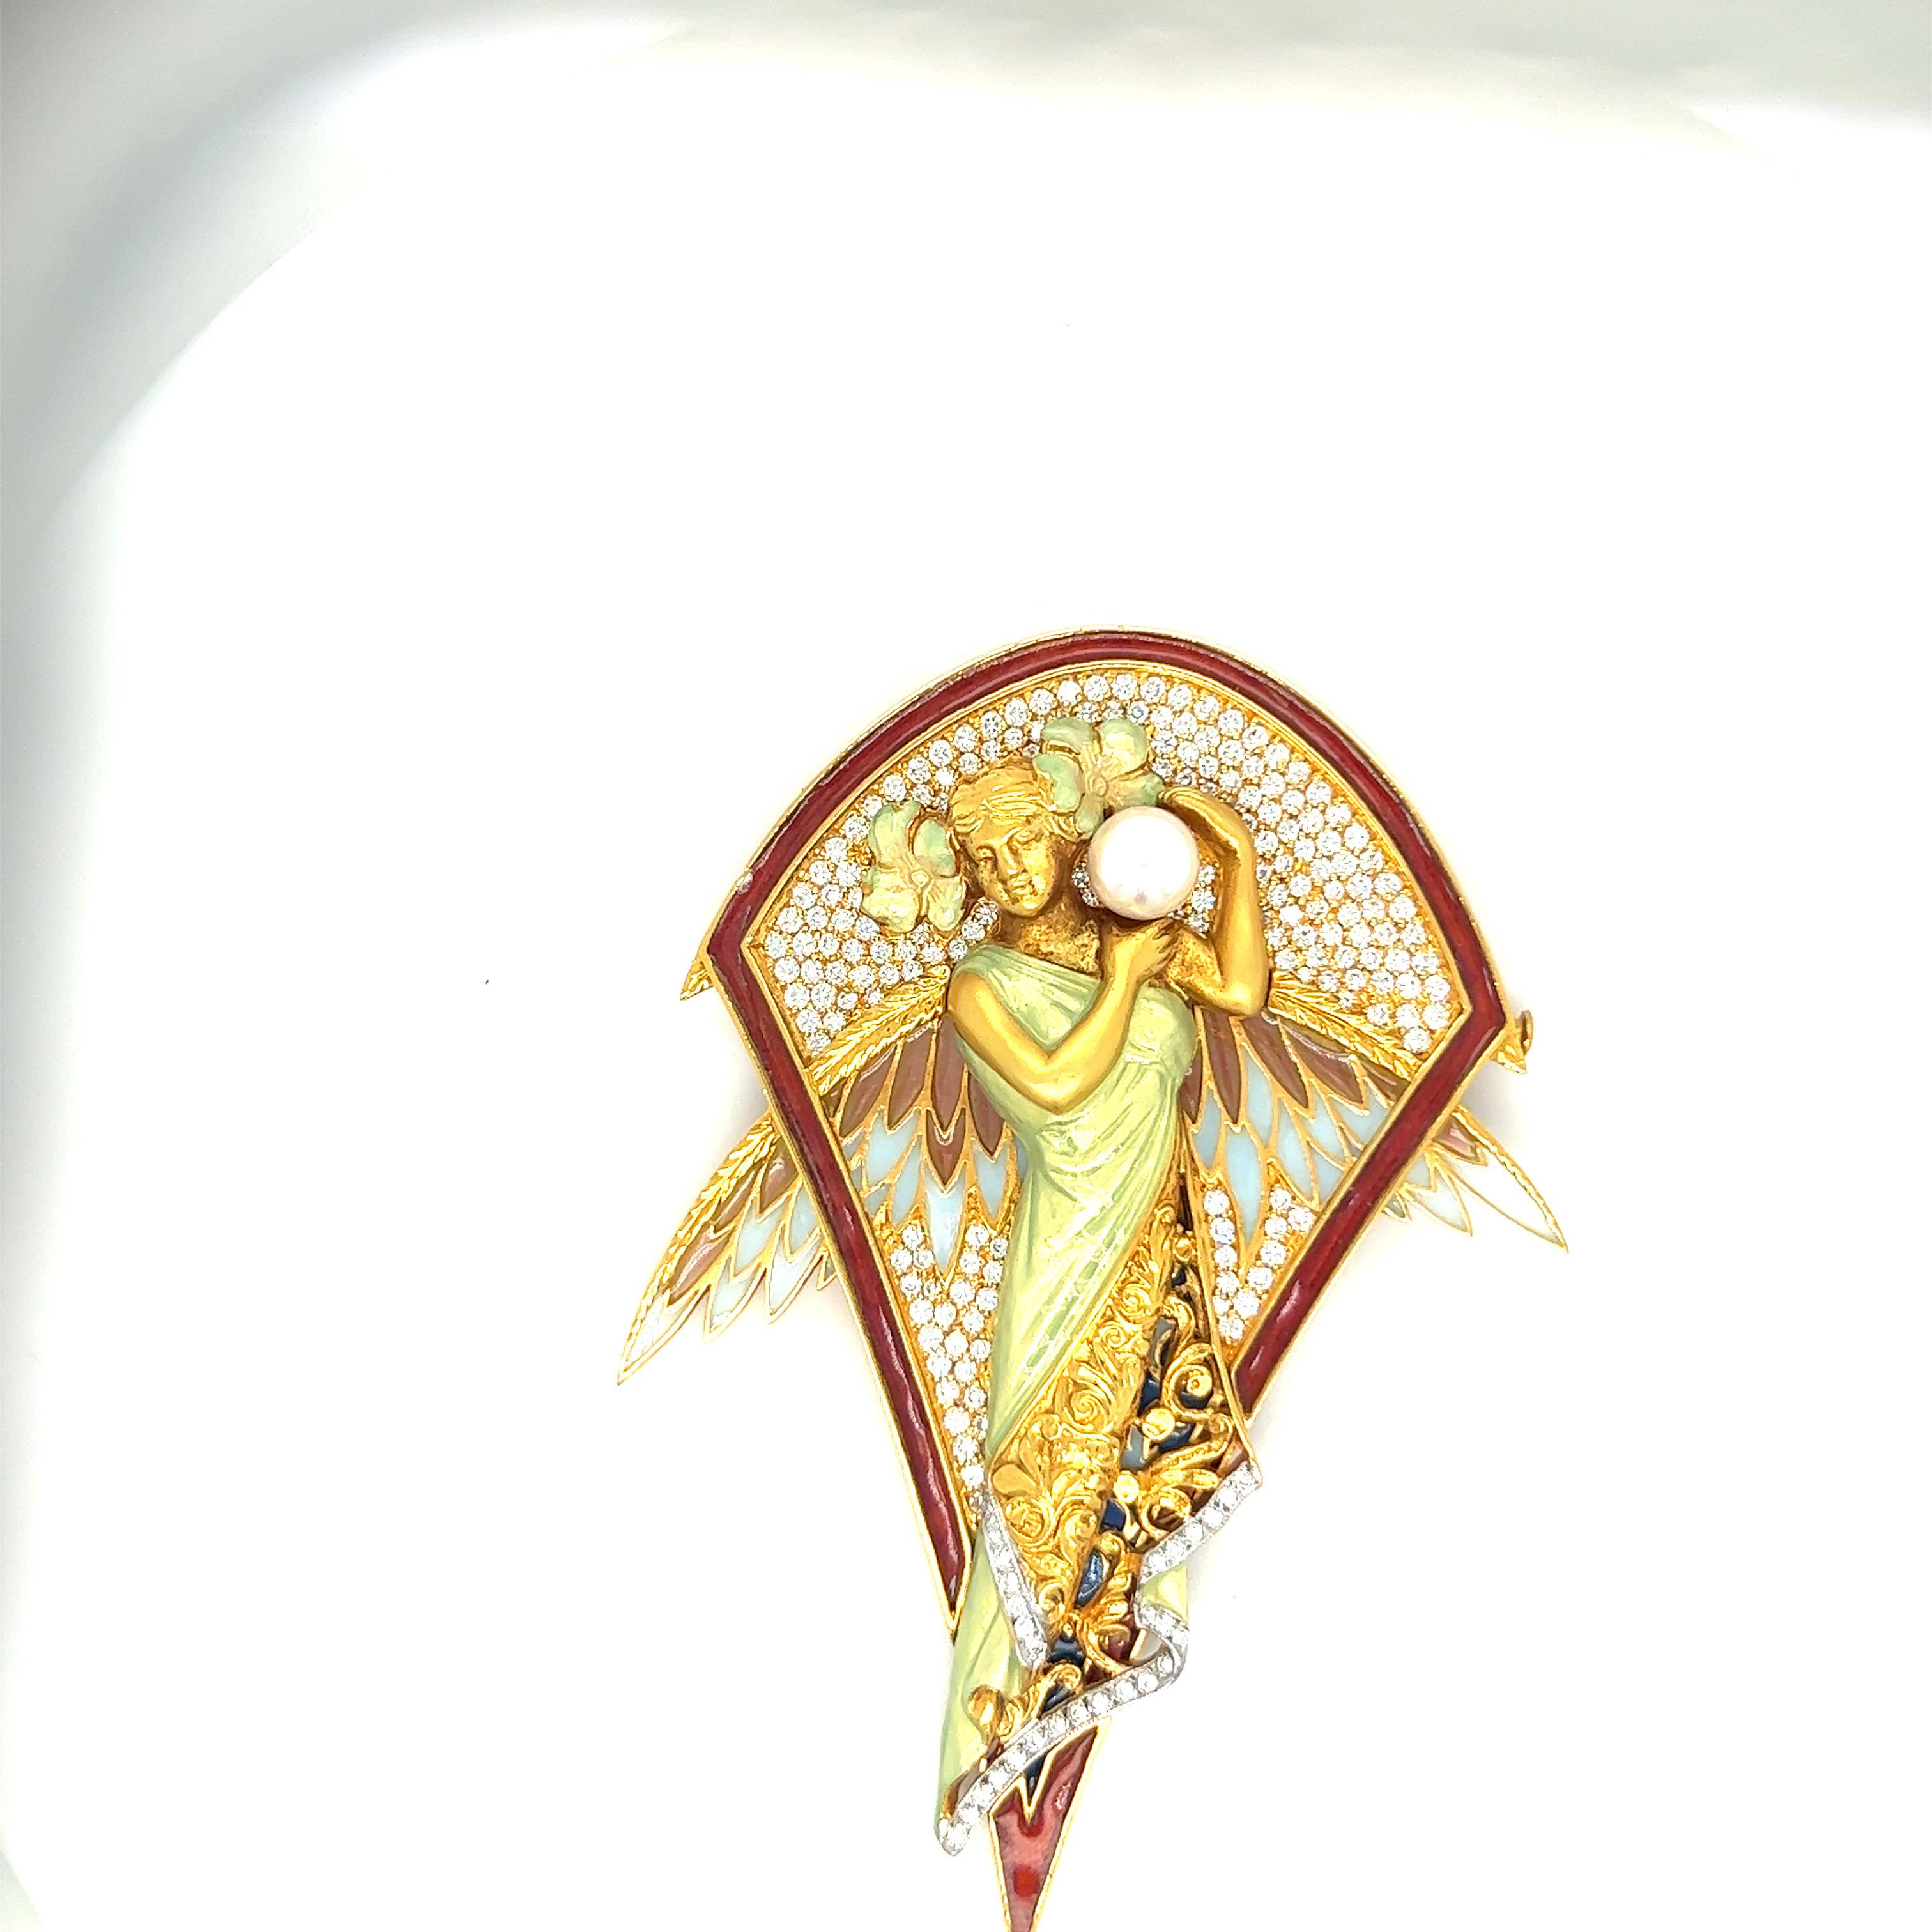 Masriera 18 KT YG Winged Nymph Brooch with Dia 1.94CT, Enamel and Pearls In New Condition For Sale In New York, NY